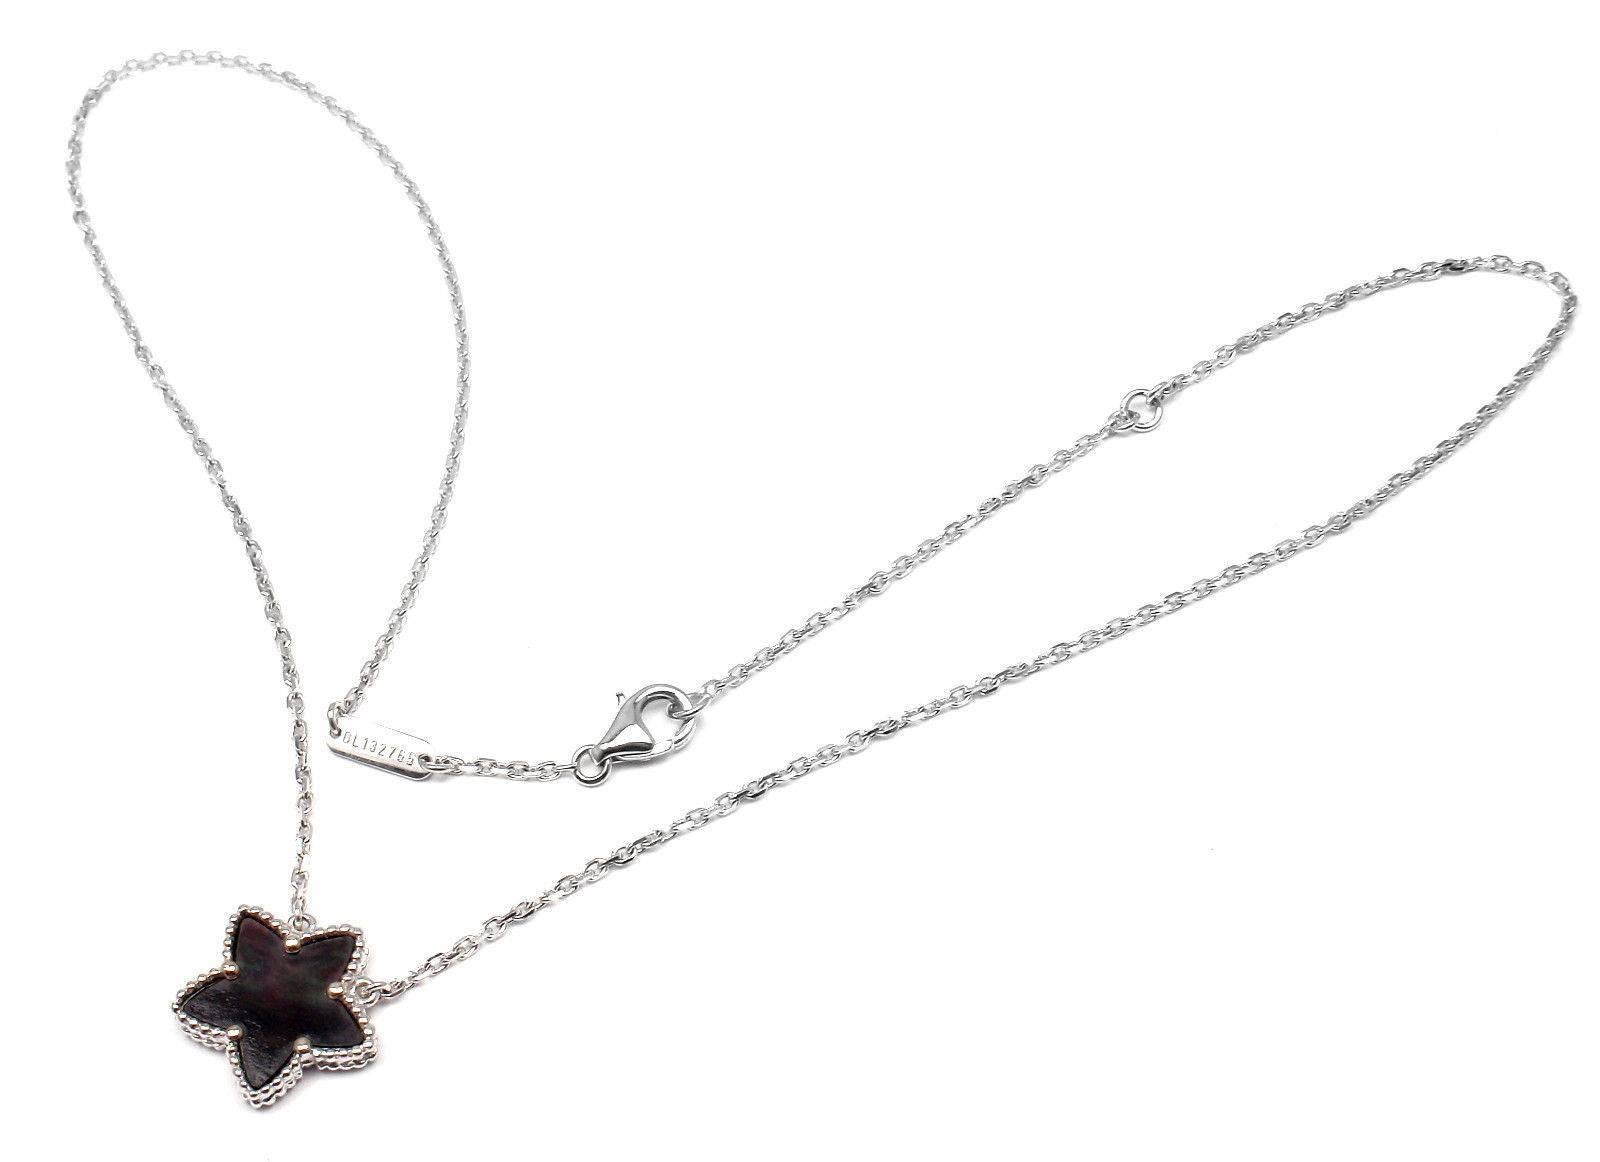 18k White Gold Grey Mother of Pearl Lucky Star Necklace by Van Cleef & Arpels.
With 1 star shape grey mother of pearl 15mm

Details:
Weight: 5.2 grams
Measurements: Length 16